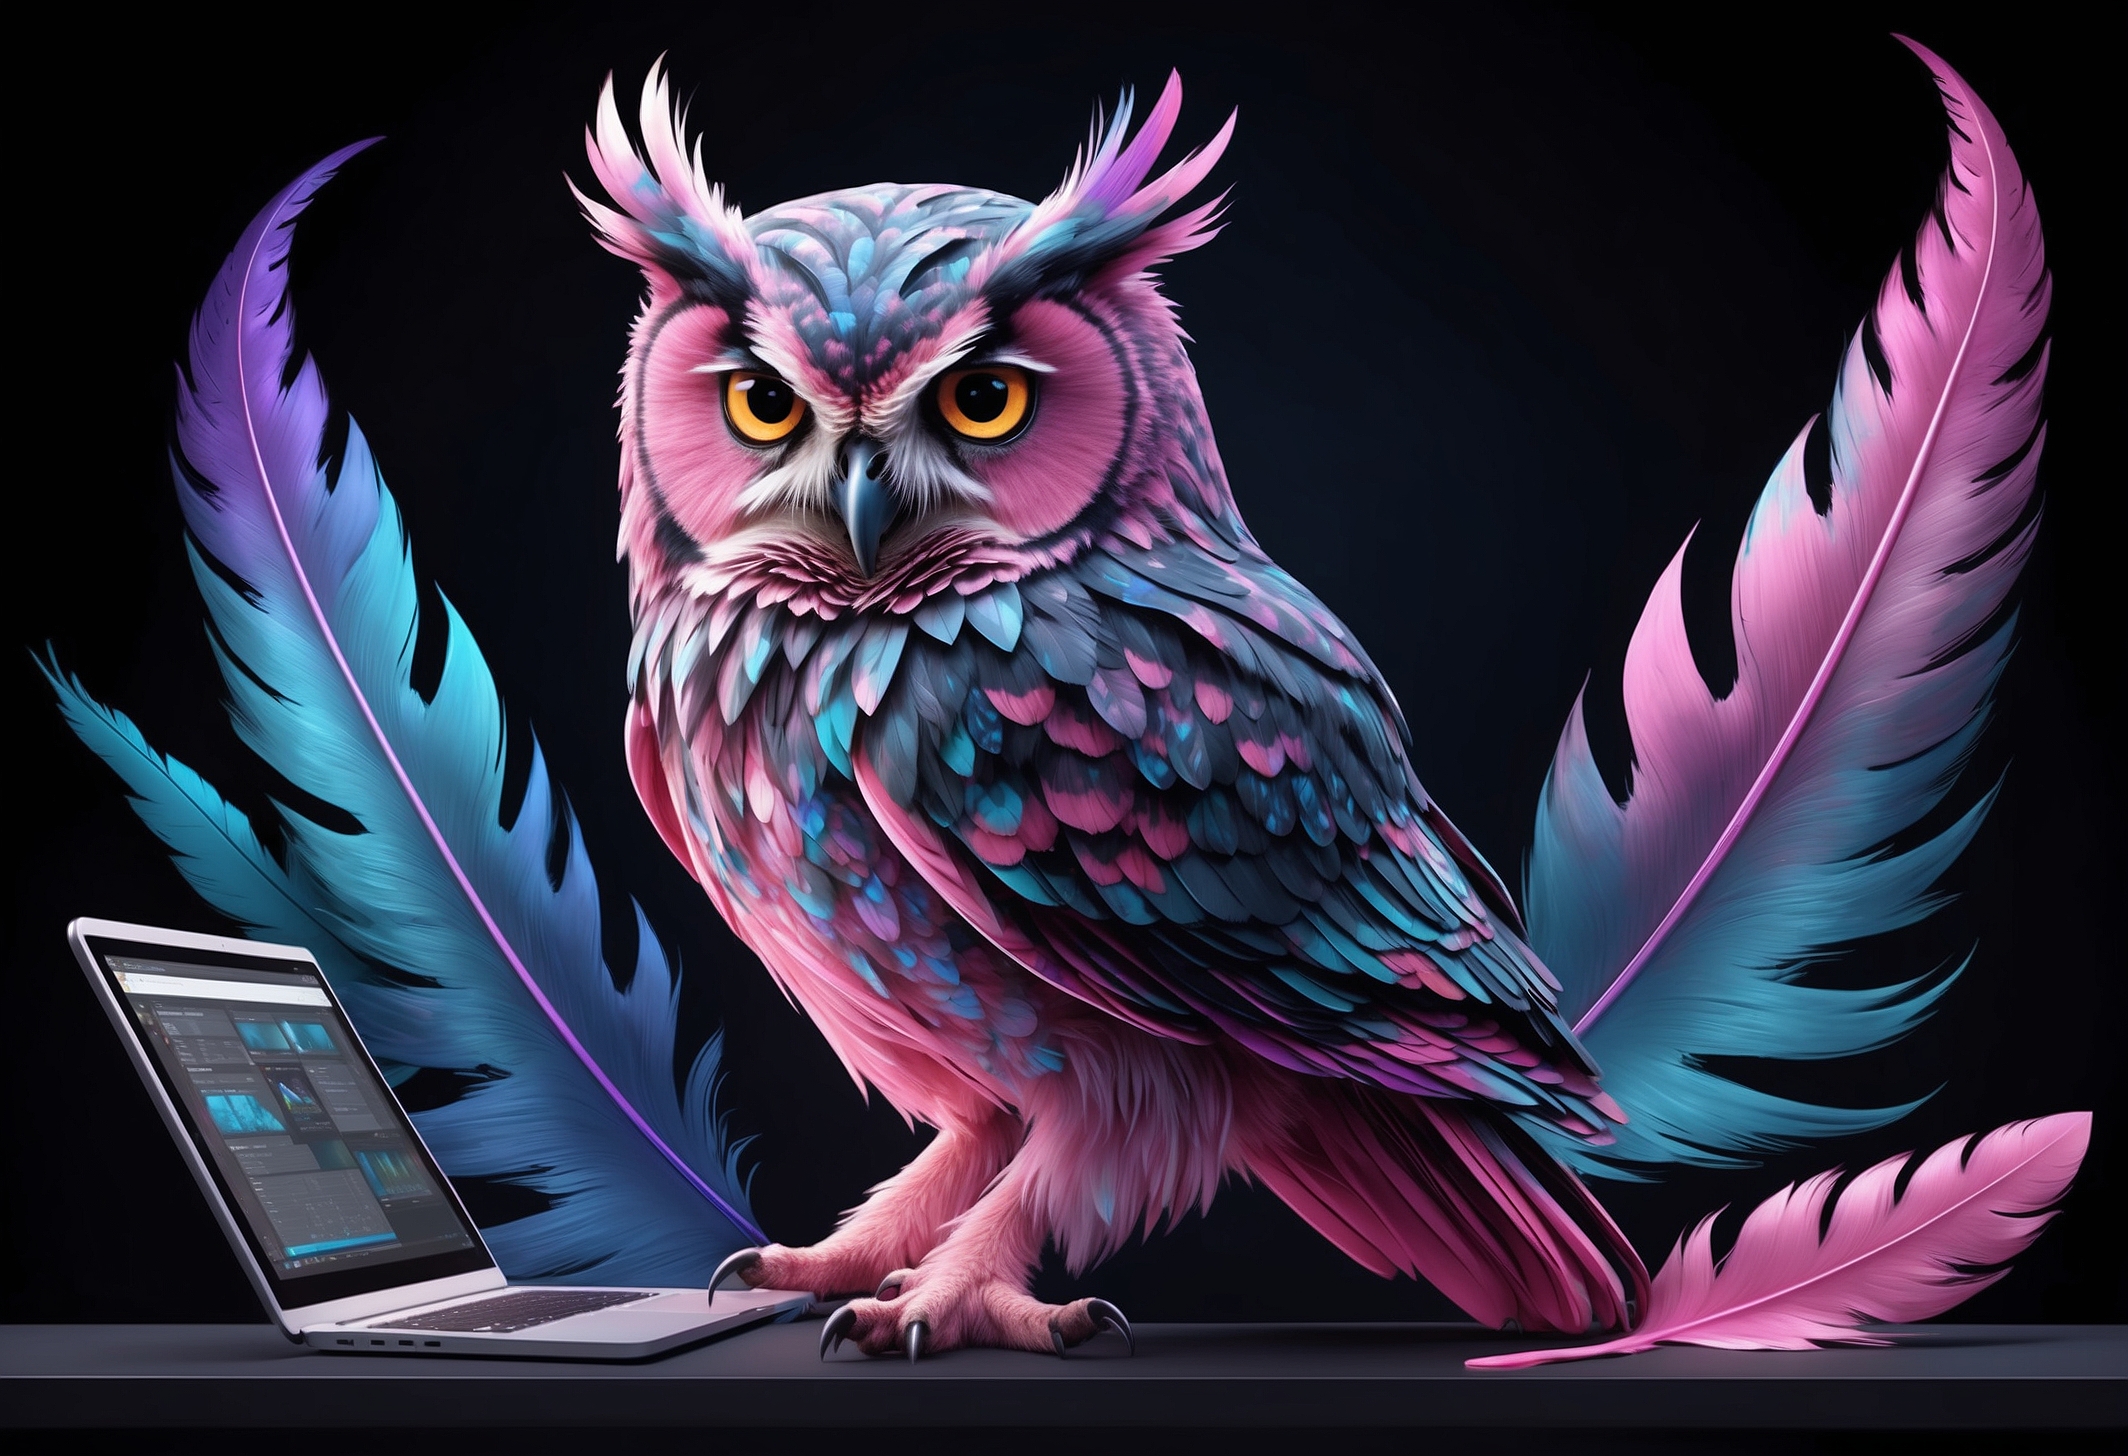 AlbedoBase_XL_A_beautiful_owl_in_the_style_of_an_artistic_pain_0.jpg